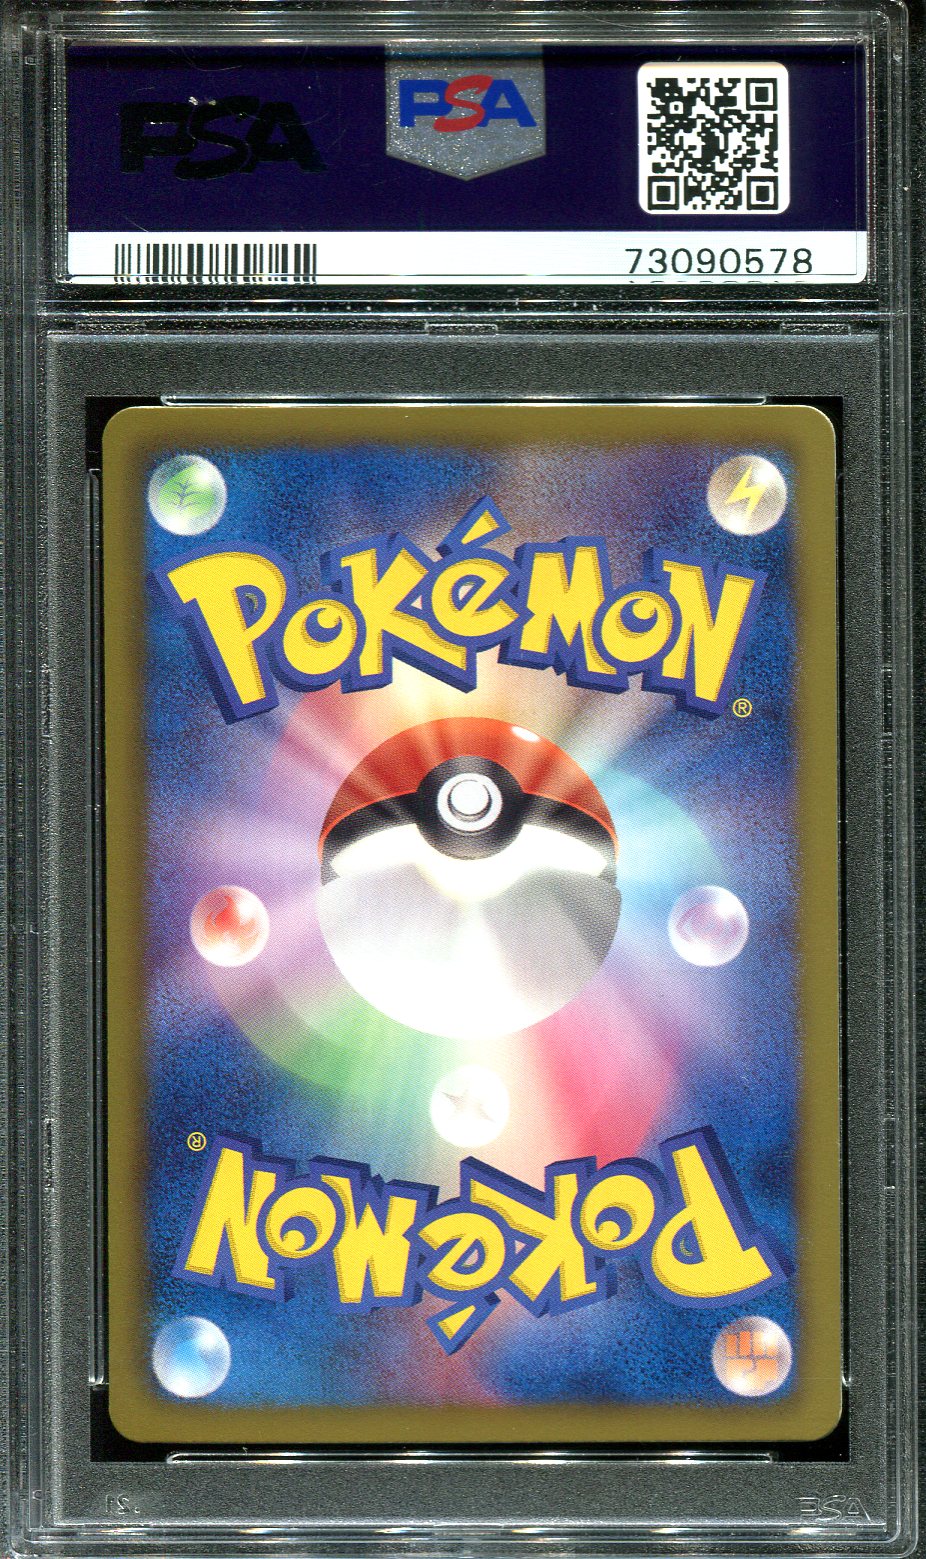 AXEW 056/066 PSA 10 POKEMON RED COLLECTION BW2 JAPANESE